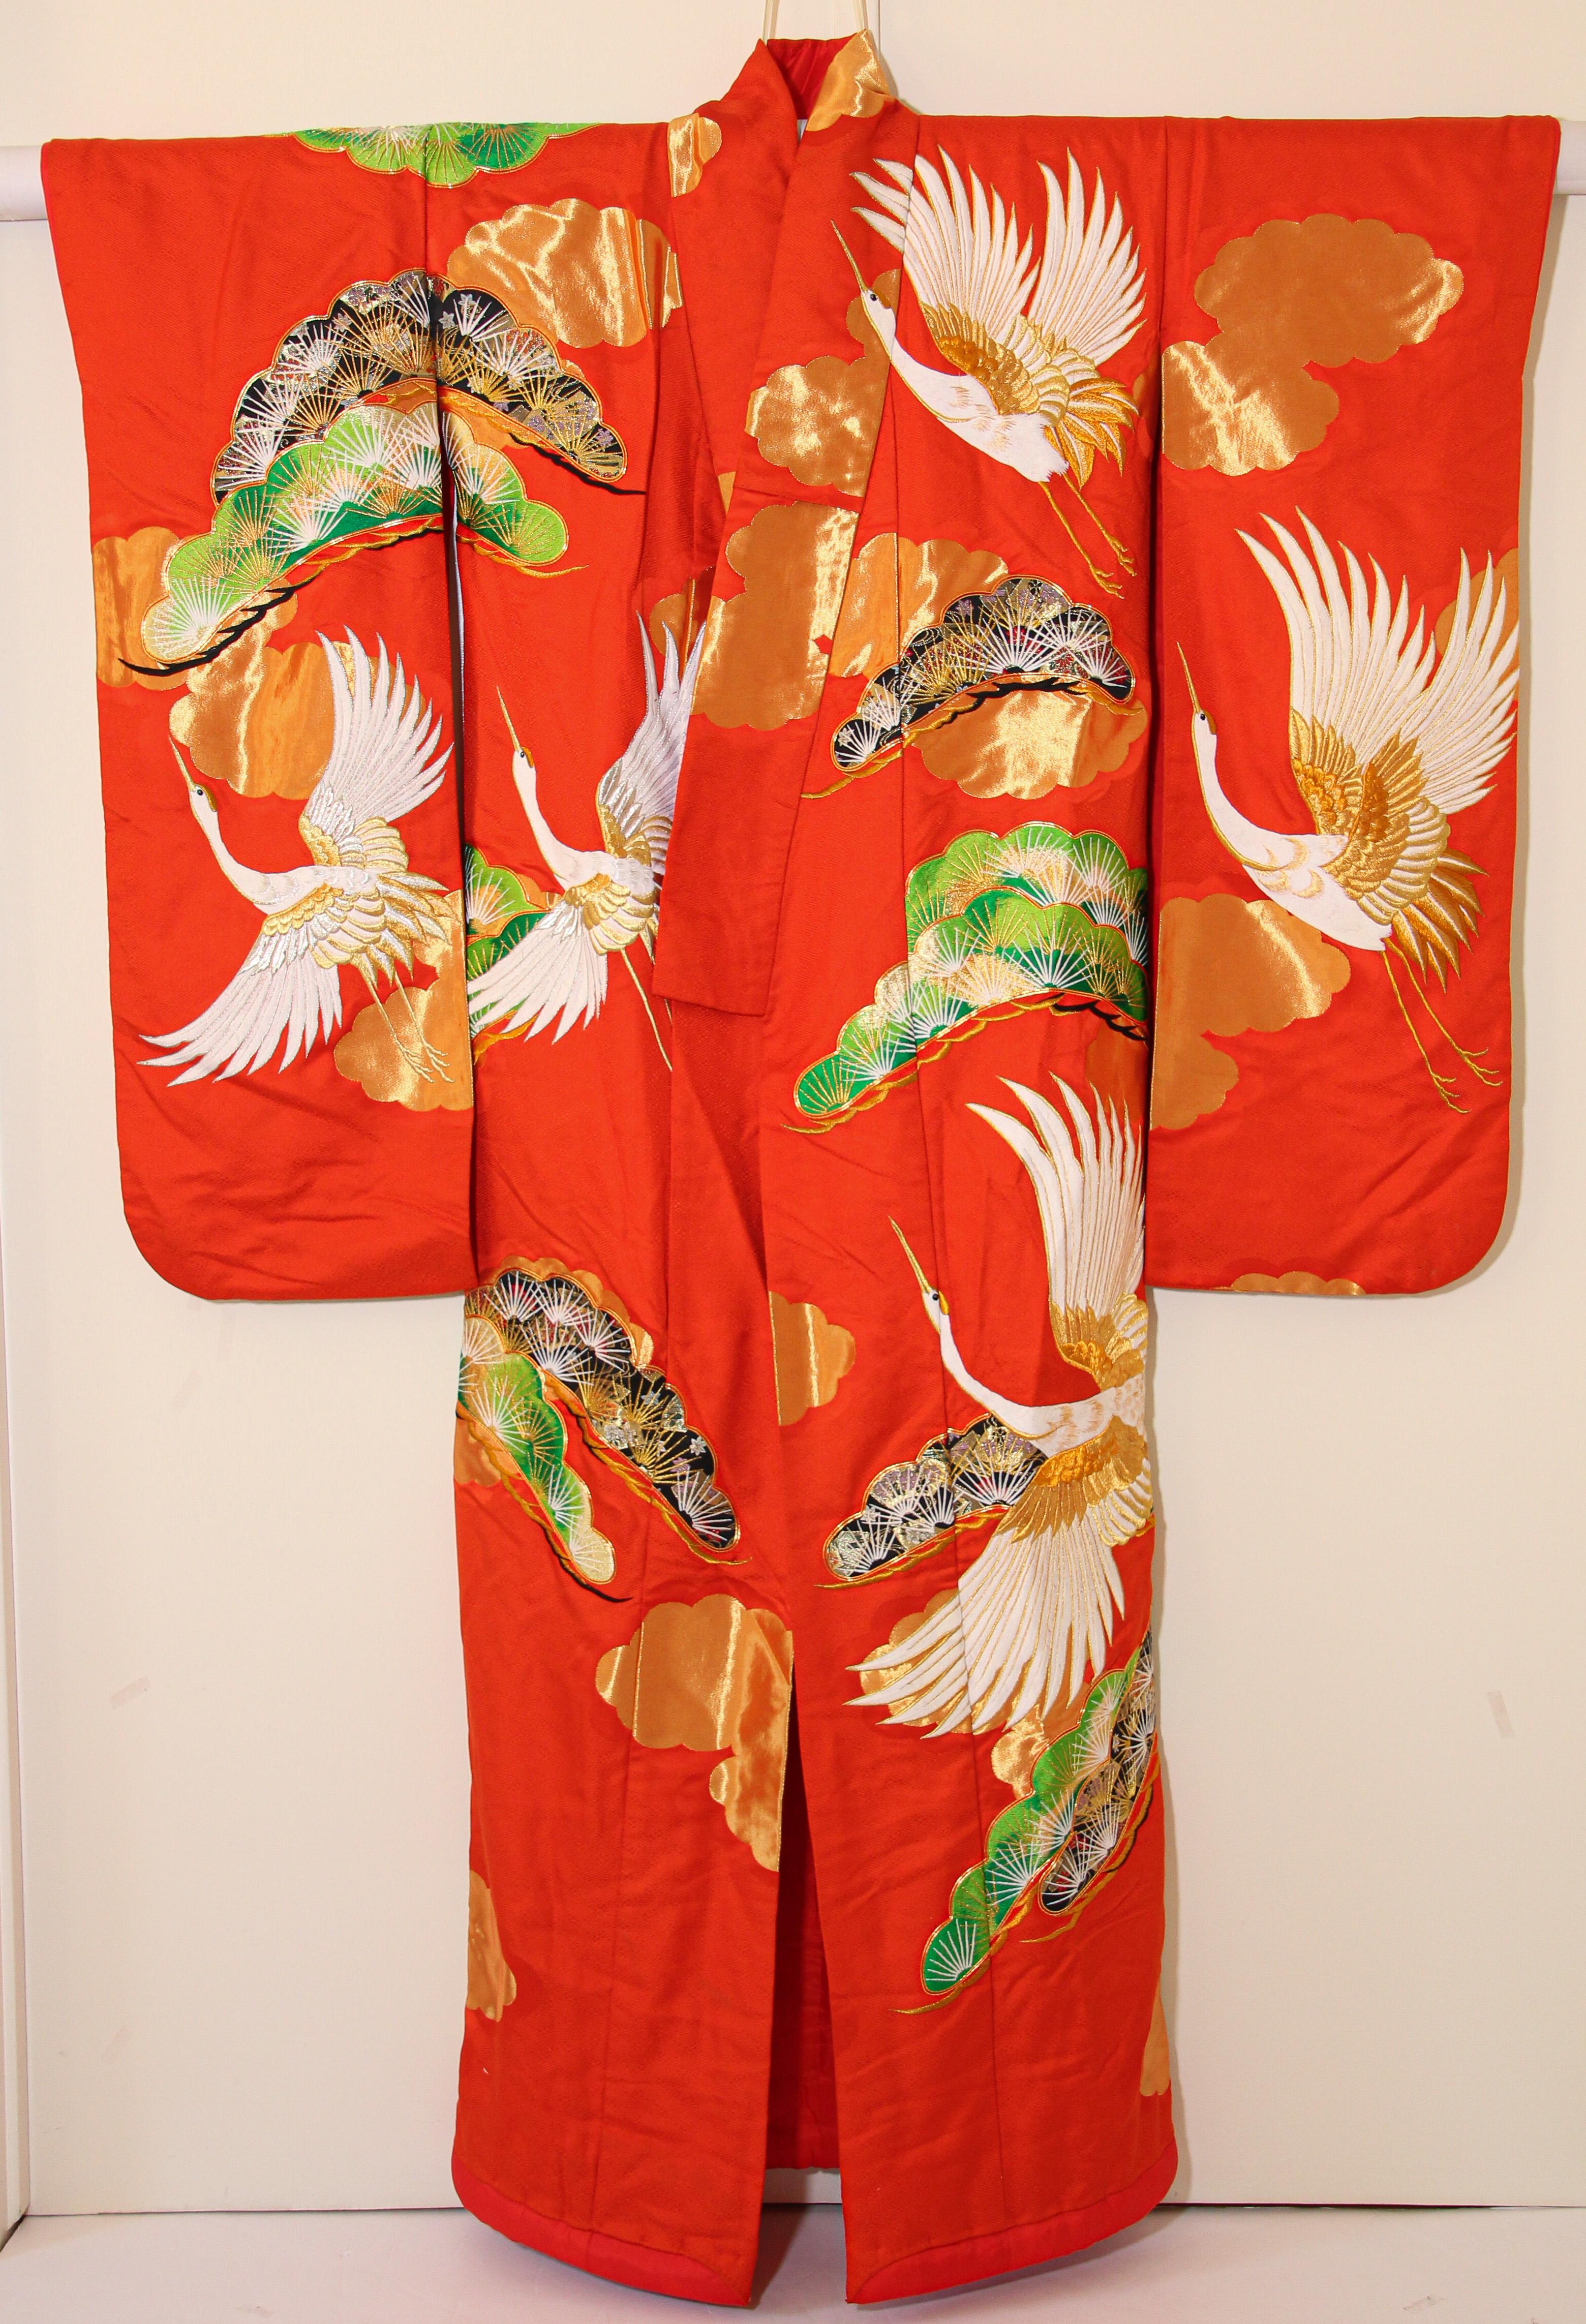 Vintage Red Brocade with Flying Cranes Japanese Ceremonial Kimono 5